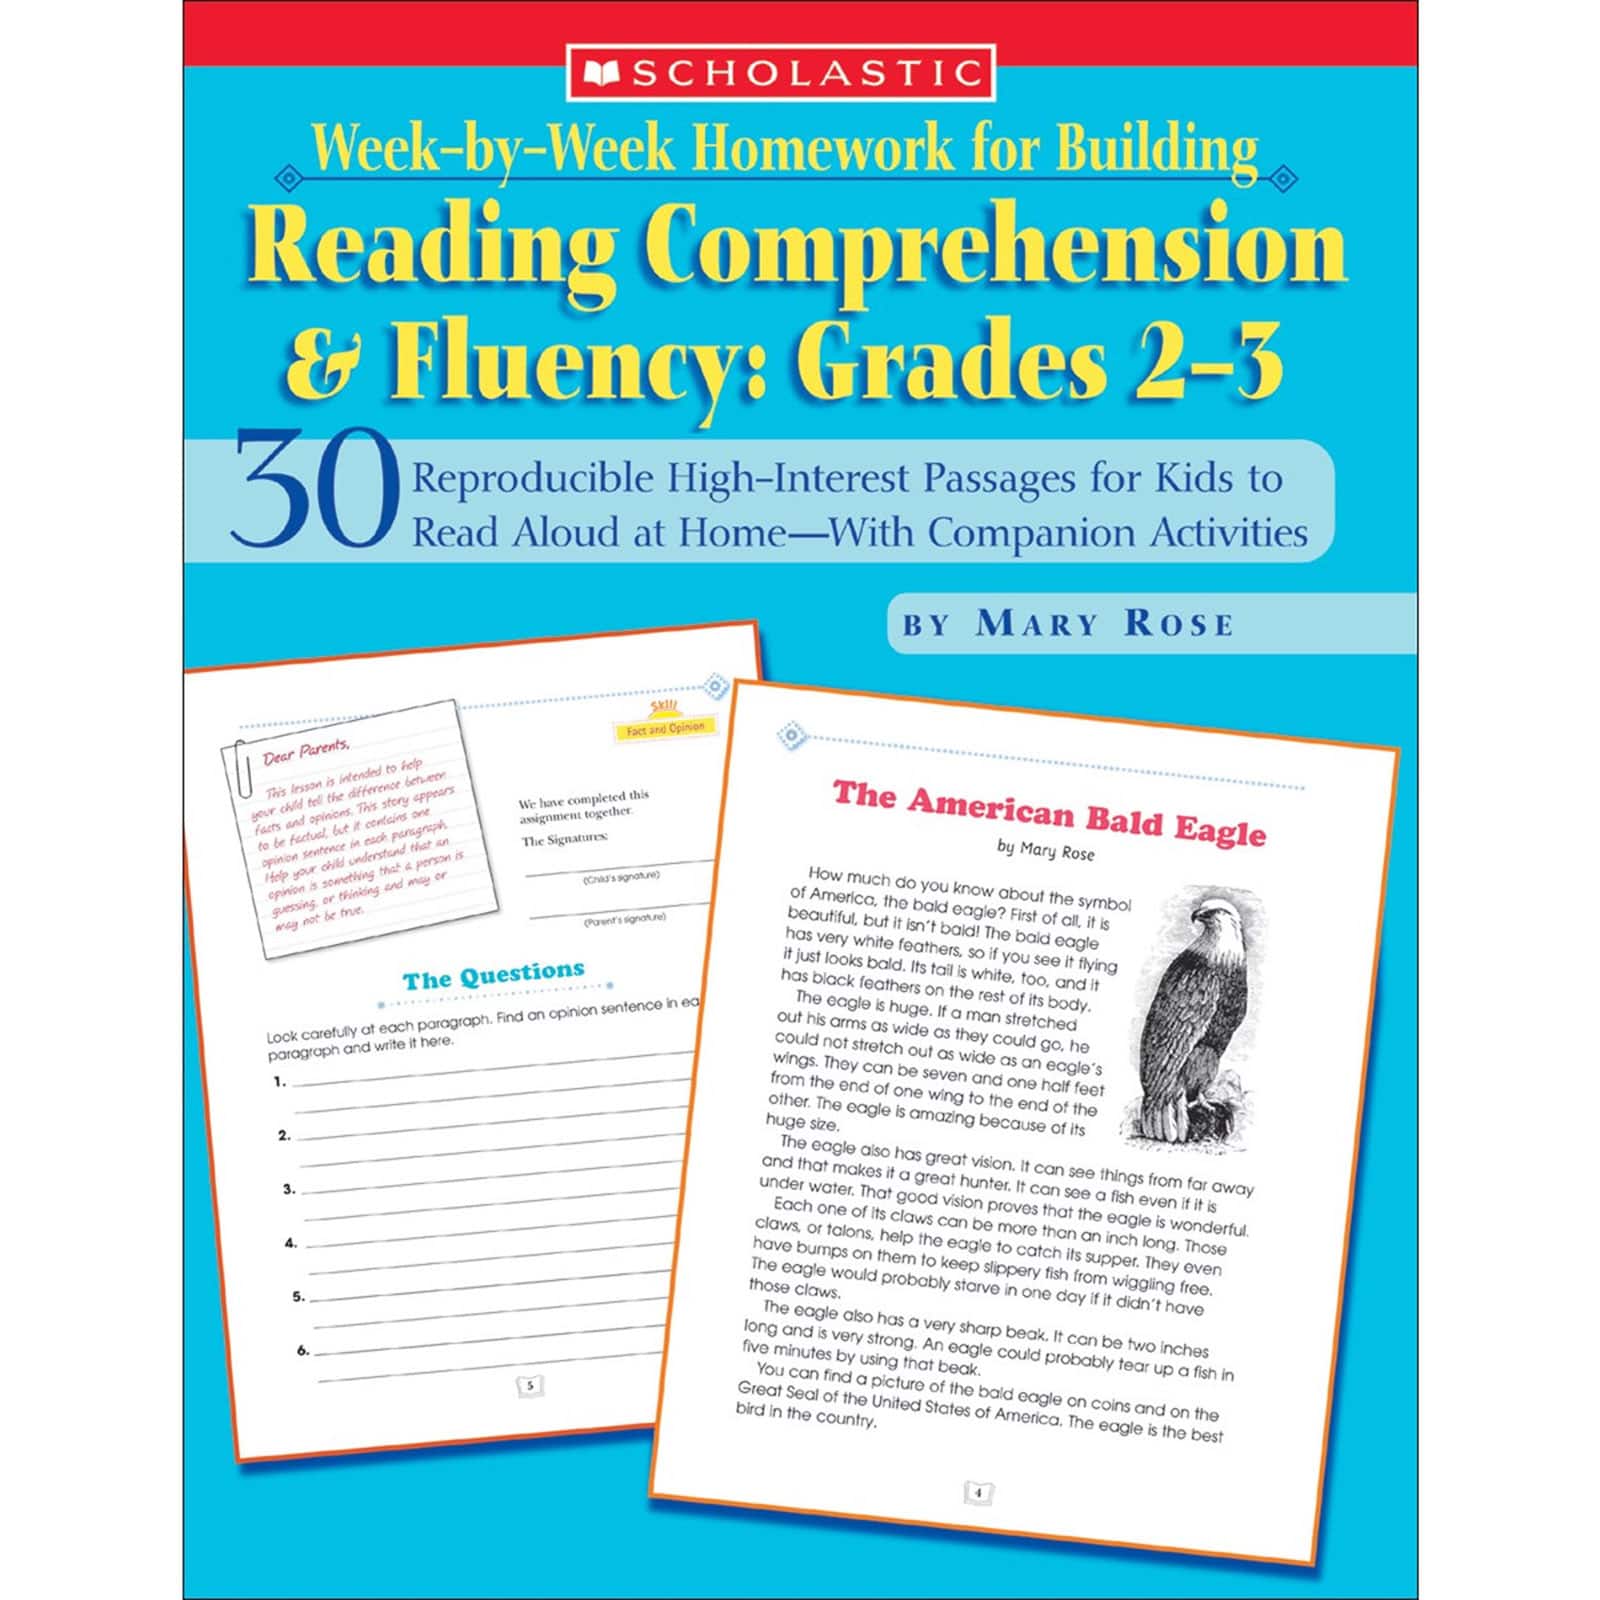 Scholastic Teaching Resources Week By Week Homework for Building Reading Comprehension and Fluency, Grades 2-3